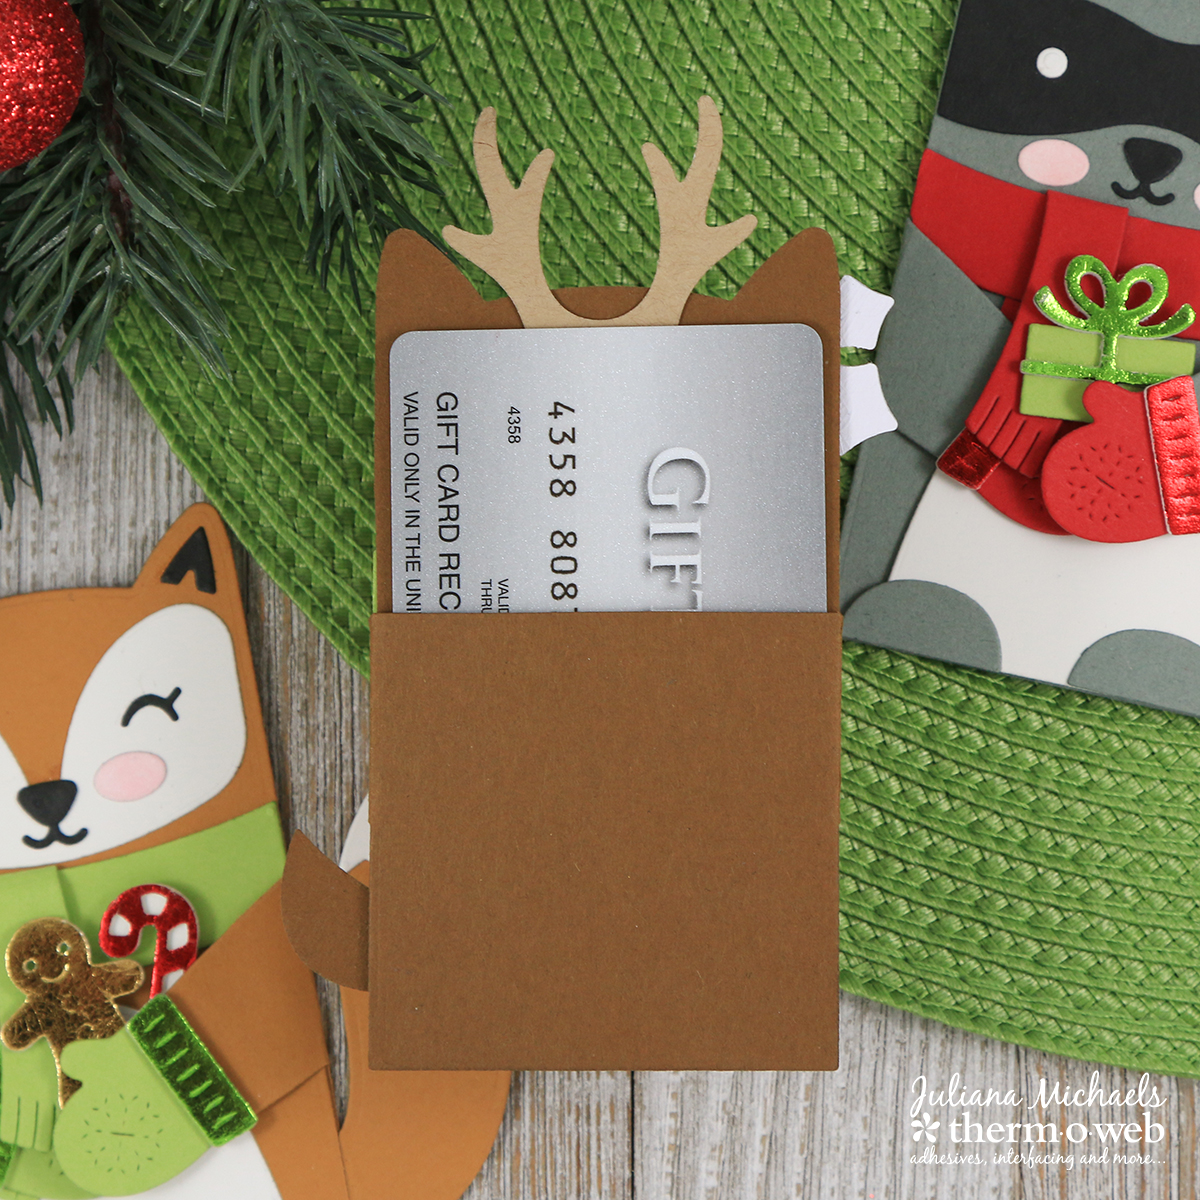 Backside Woodland Critters Huggers Holiday Gift Card Holder by Juliana Michaels featuring Lawn Fawn and Therm O Web DecoFoil